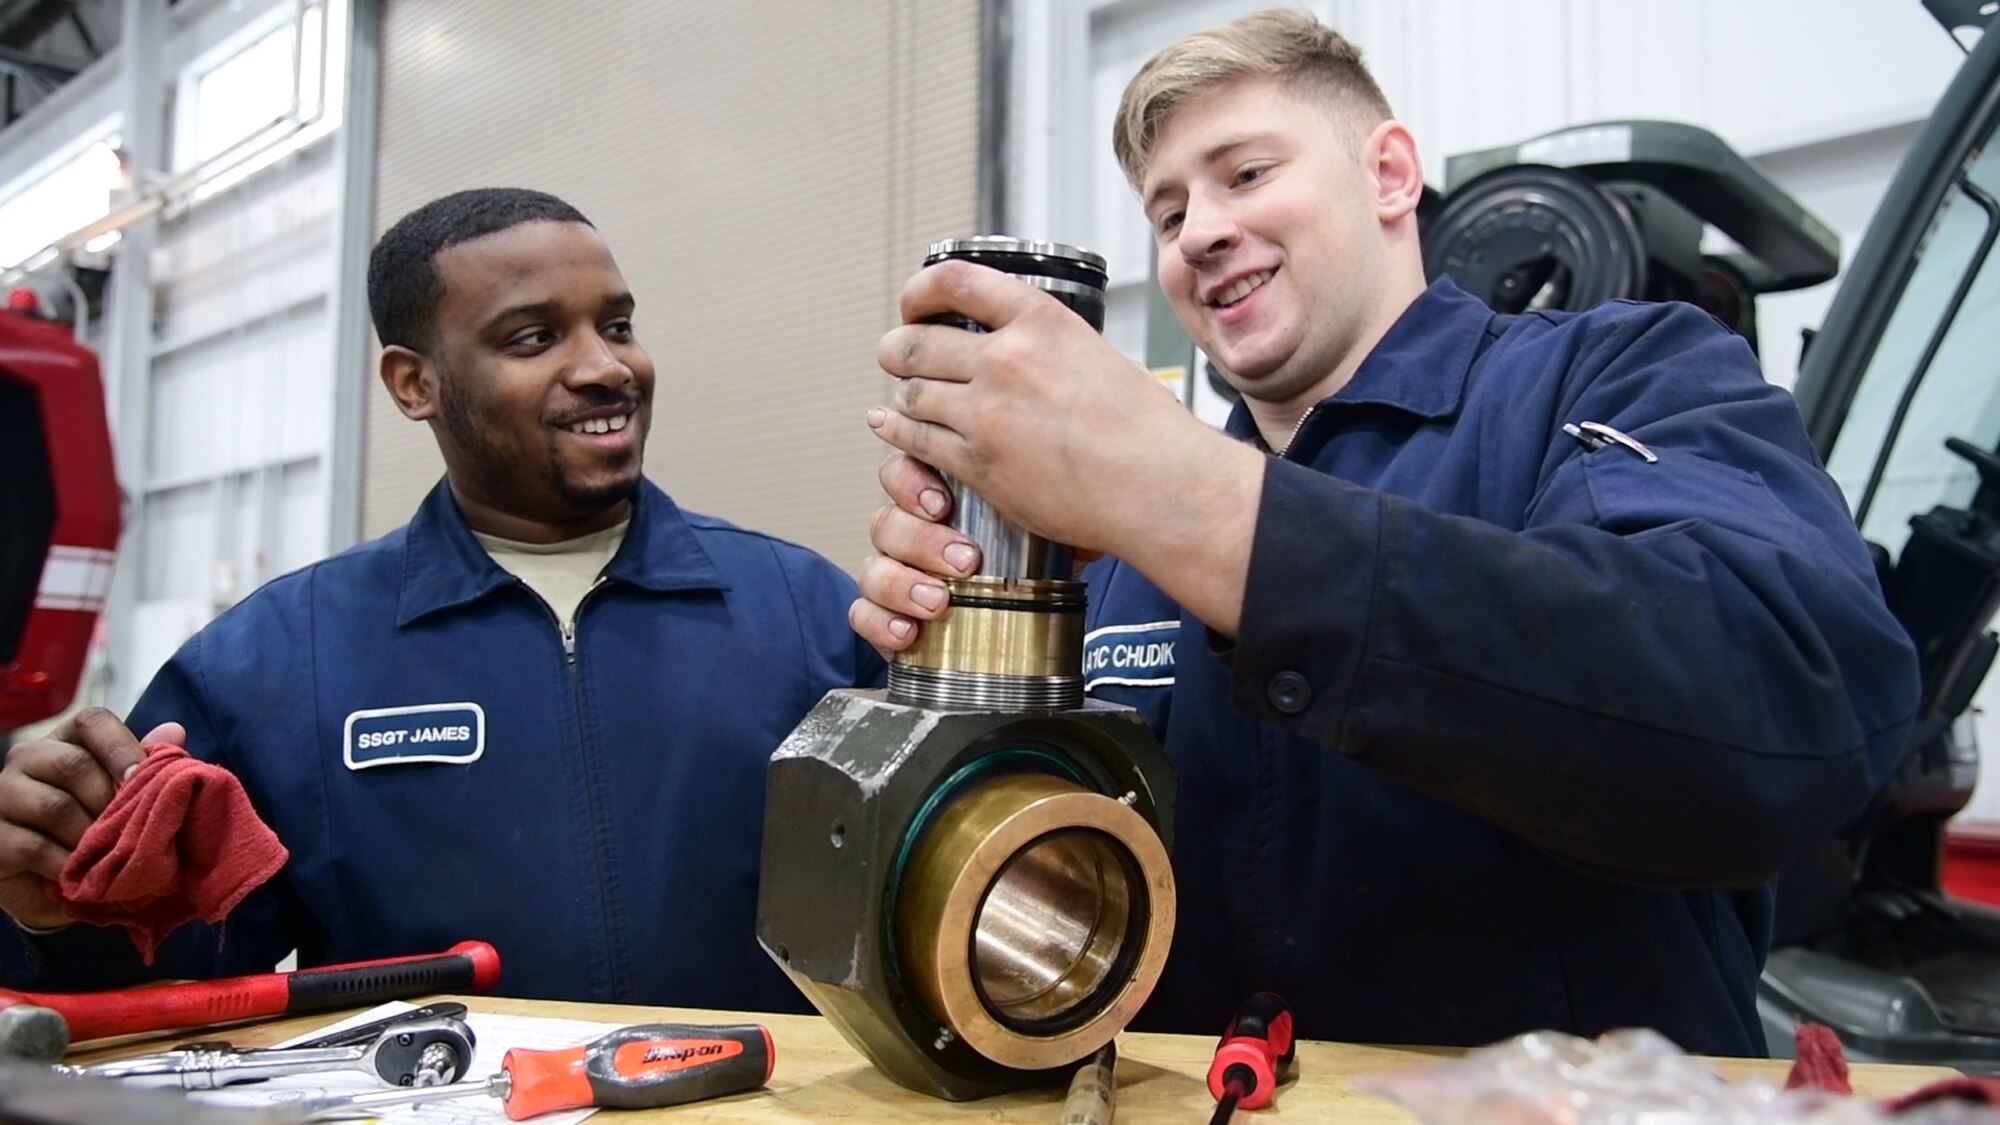 Staff Sgt. Leonard James and Airman First Class Mark Chudik, 436th Logistic Readiness Squadron Vehicle Maintenance, repair a hydraulic component for a k-loader at Dover Air Force Base, Del., on January 29, 2020. James lost his fiancé and unborn daughter in a 2010 car accident while attending vehicle maintenance technical training. (U.S. Air Force photo by Tech. Sgt. Laura Beckley).